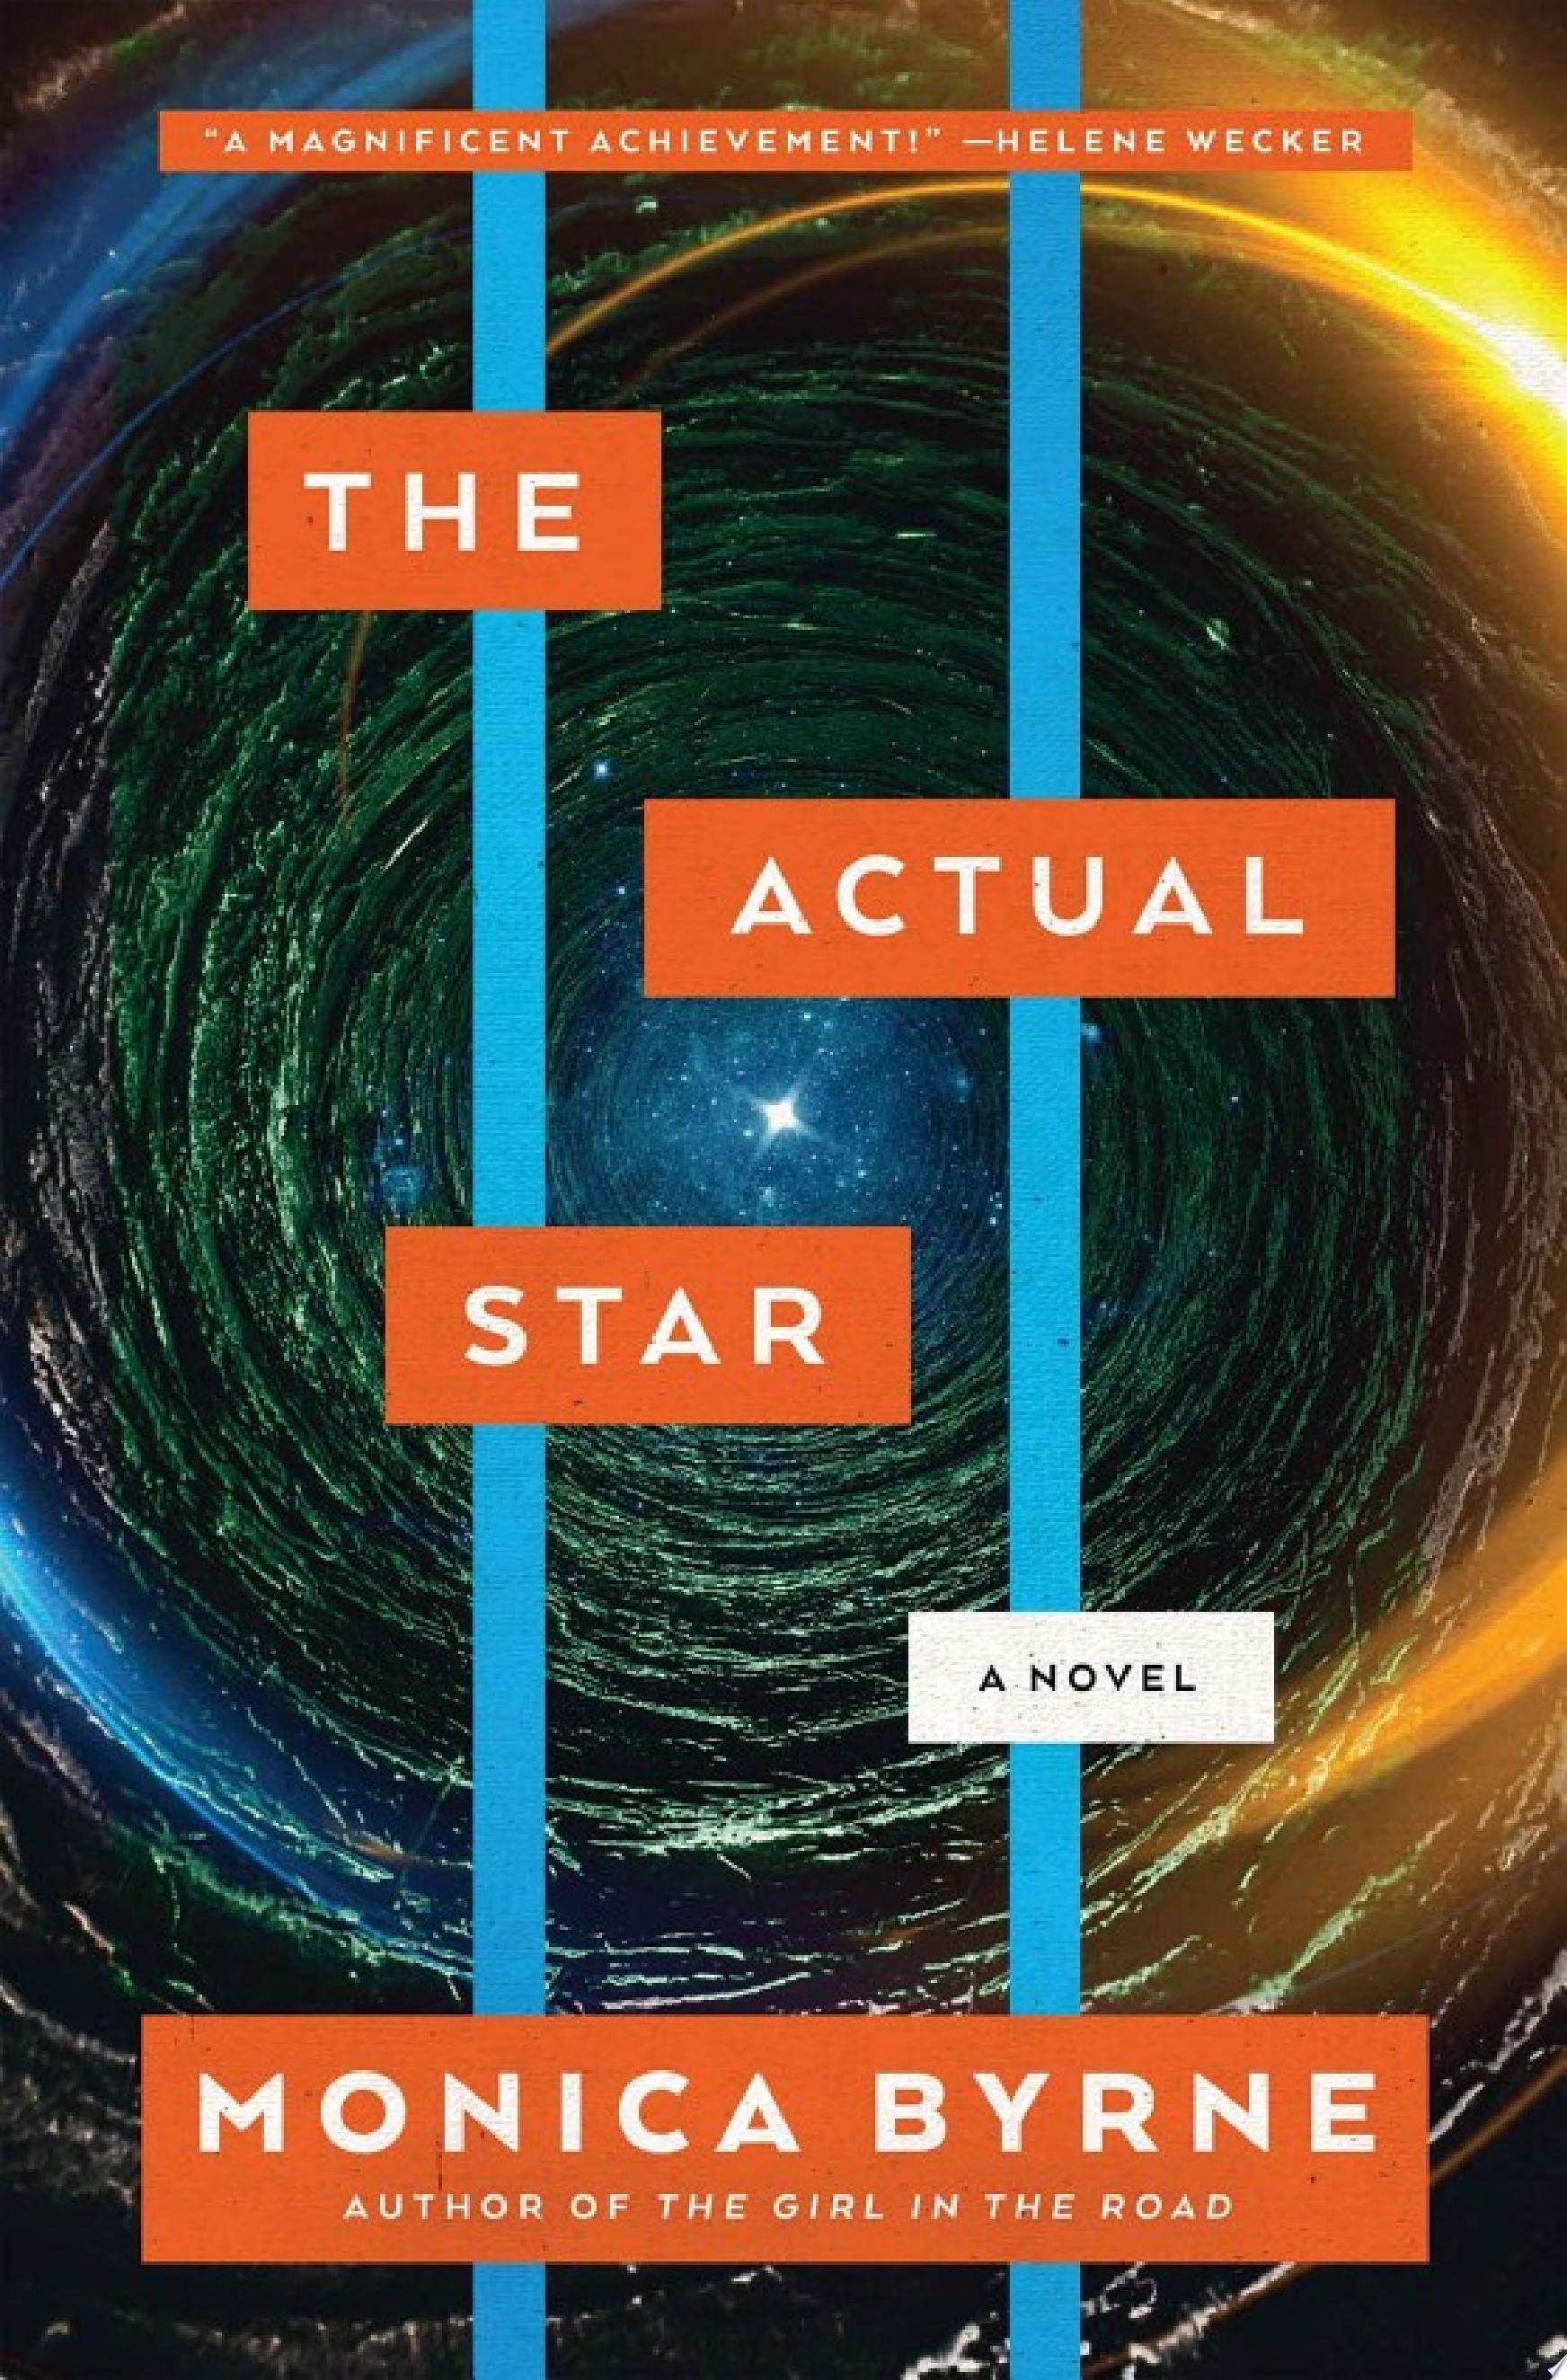 Image for "The Actual Star"